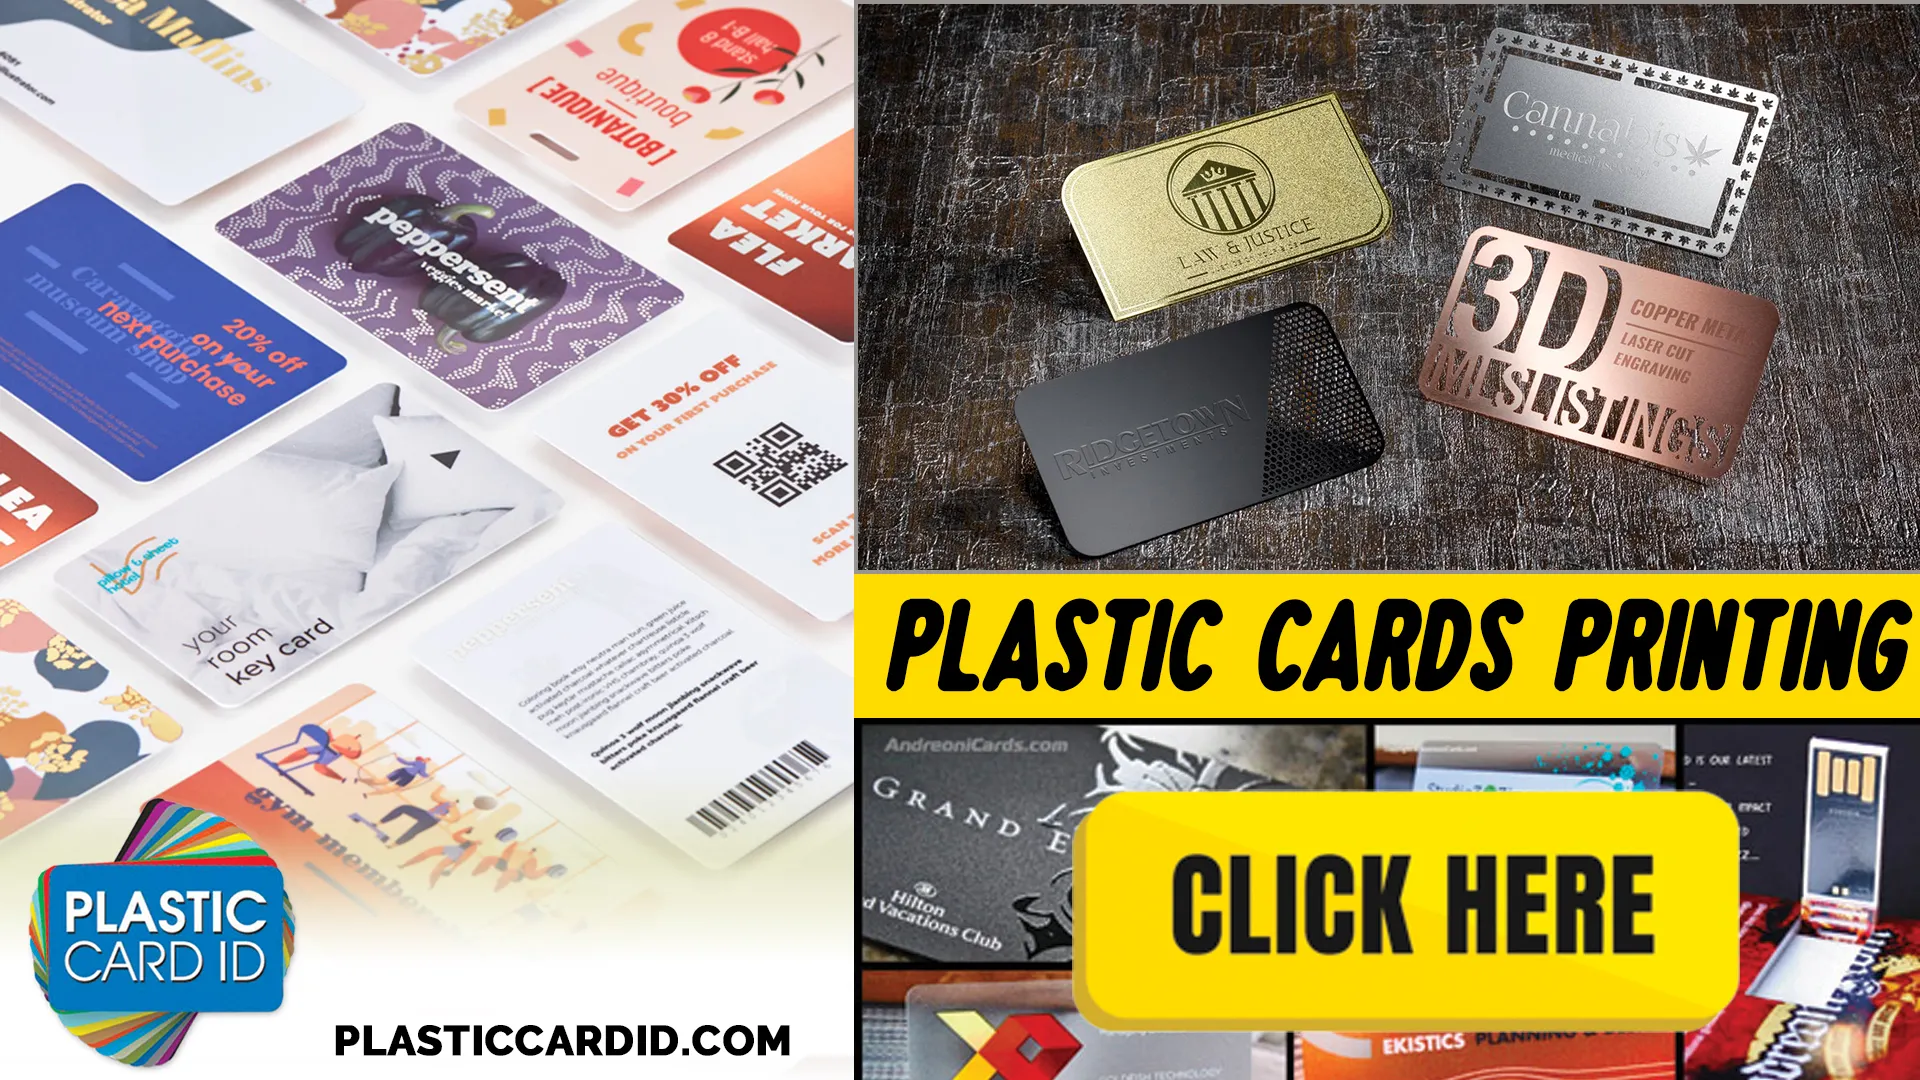 Plastic Card ID
's Comprehensive Compliance Solutions